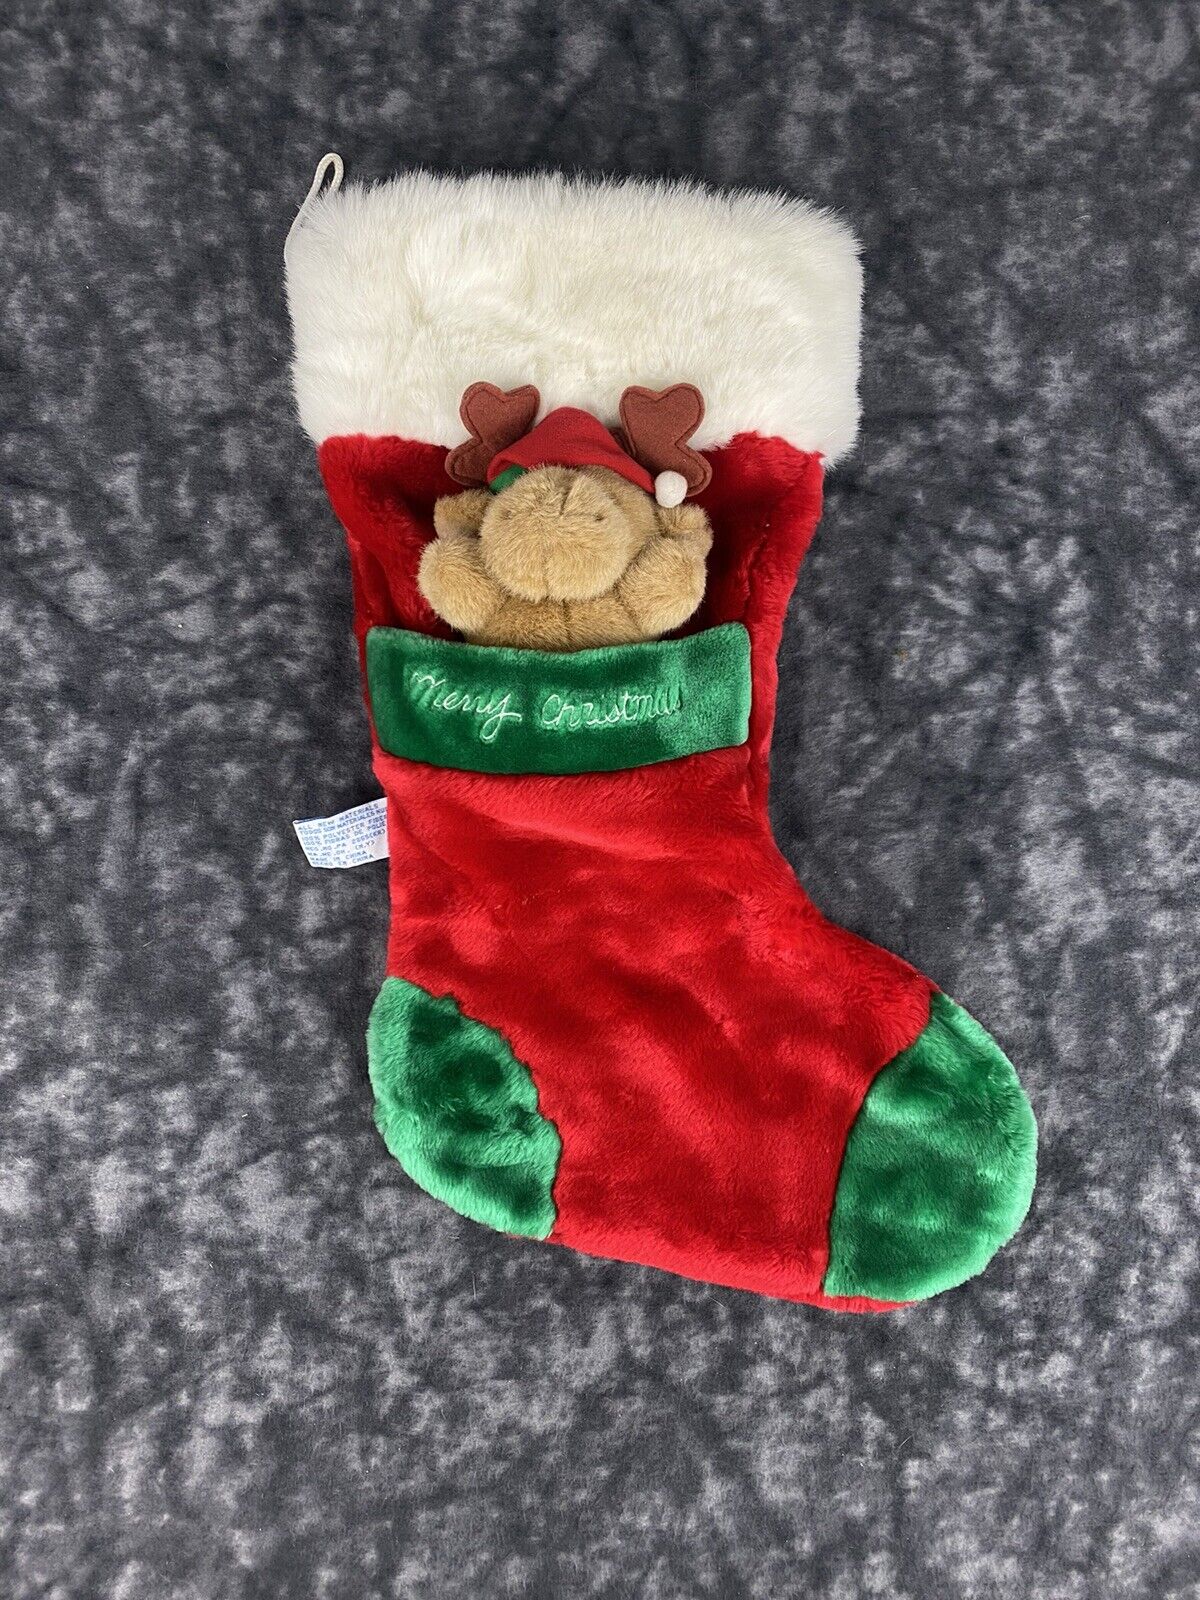 Vintage Department Store Christmas Stocking Ornament 1995 JCPenney Collection